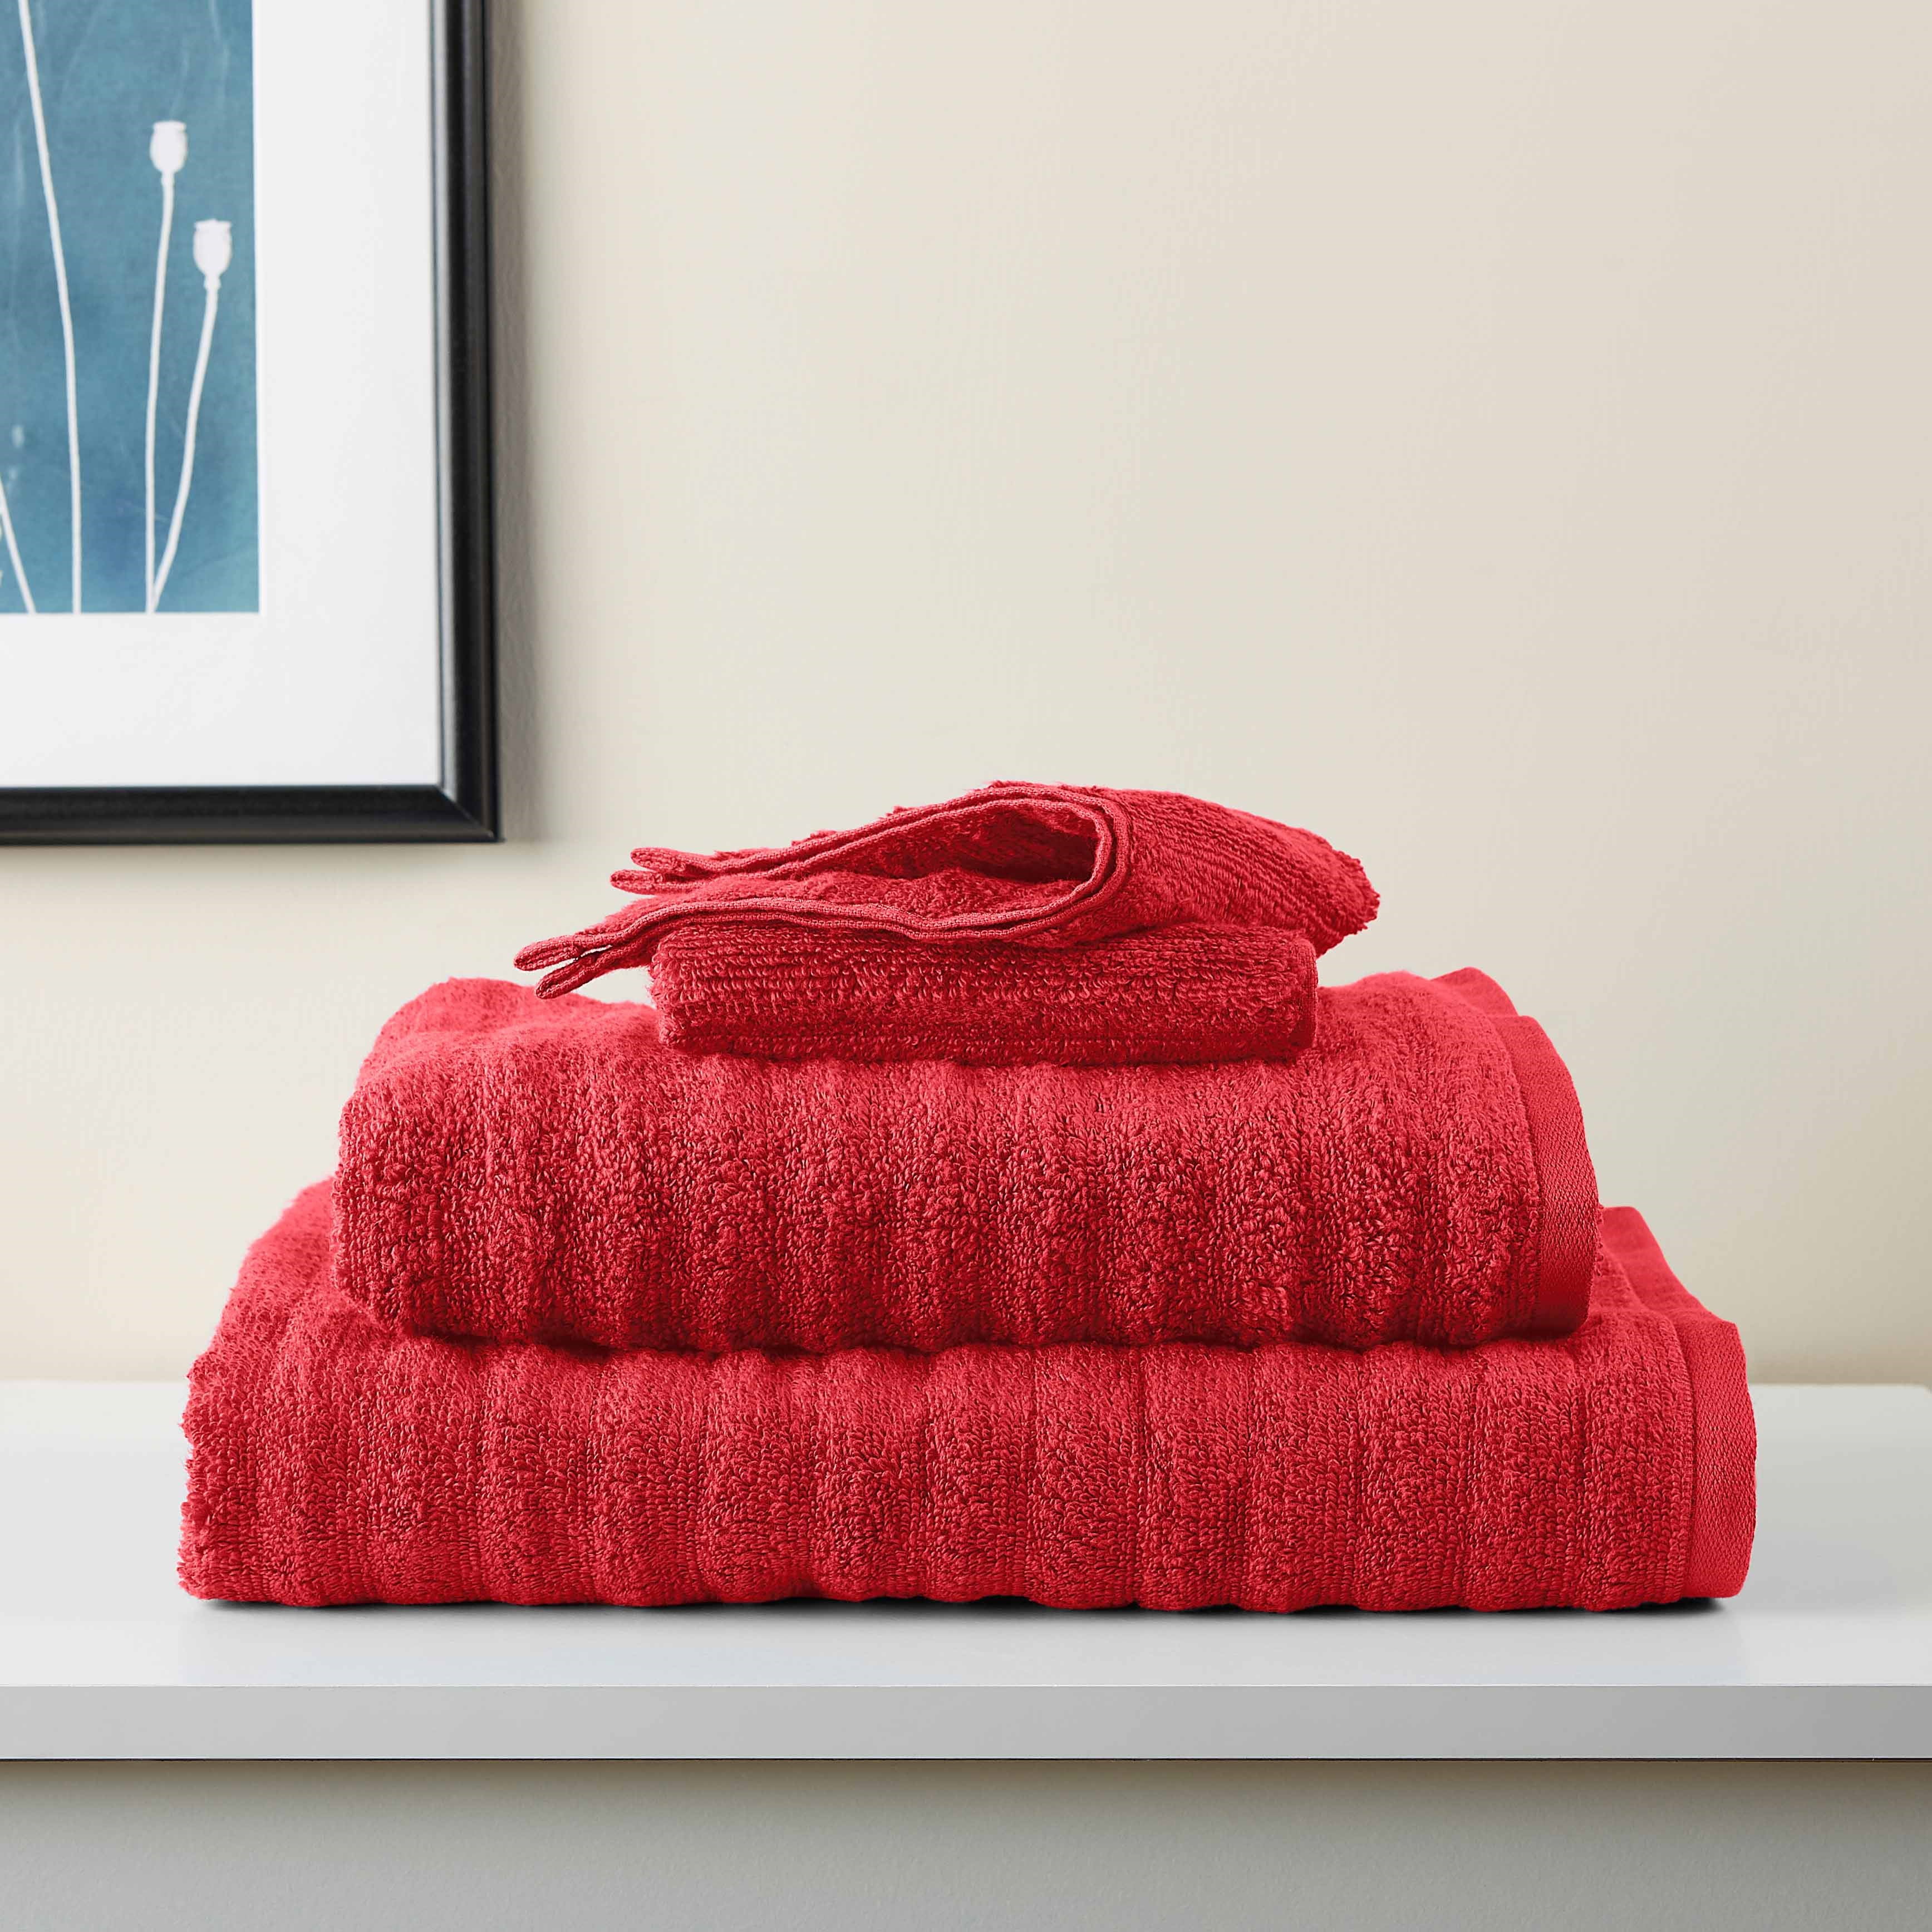 s Best-Selling Bath Towels Are Now 54% Off